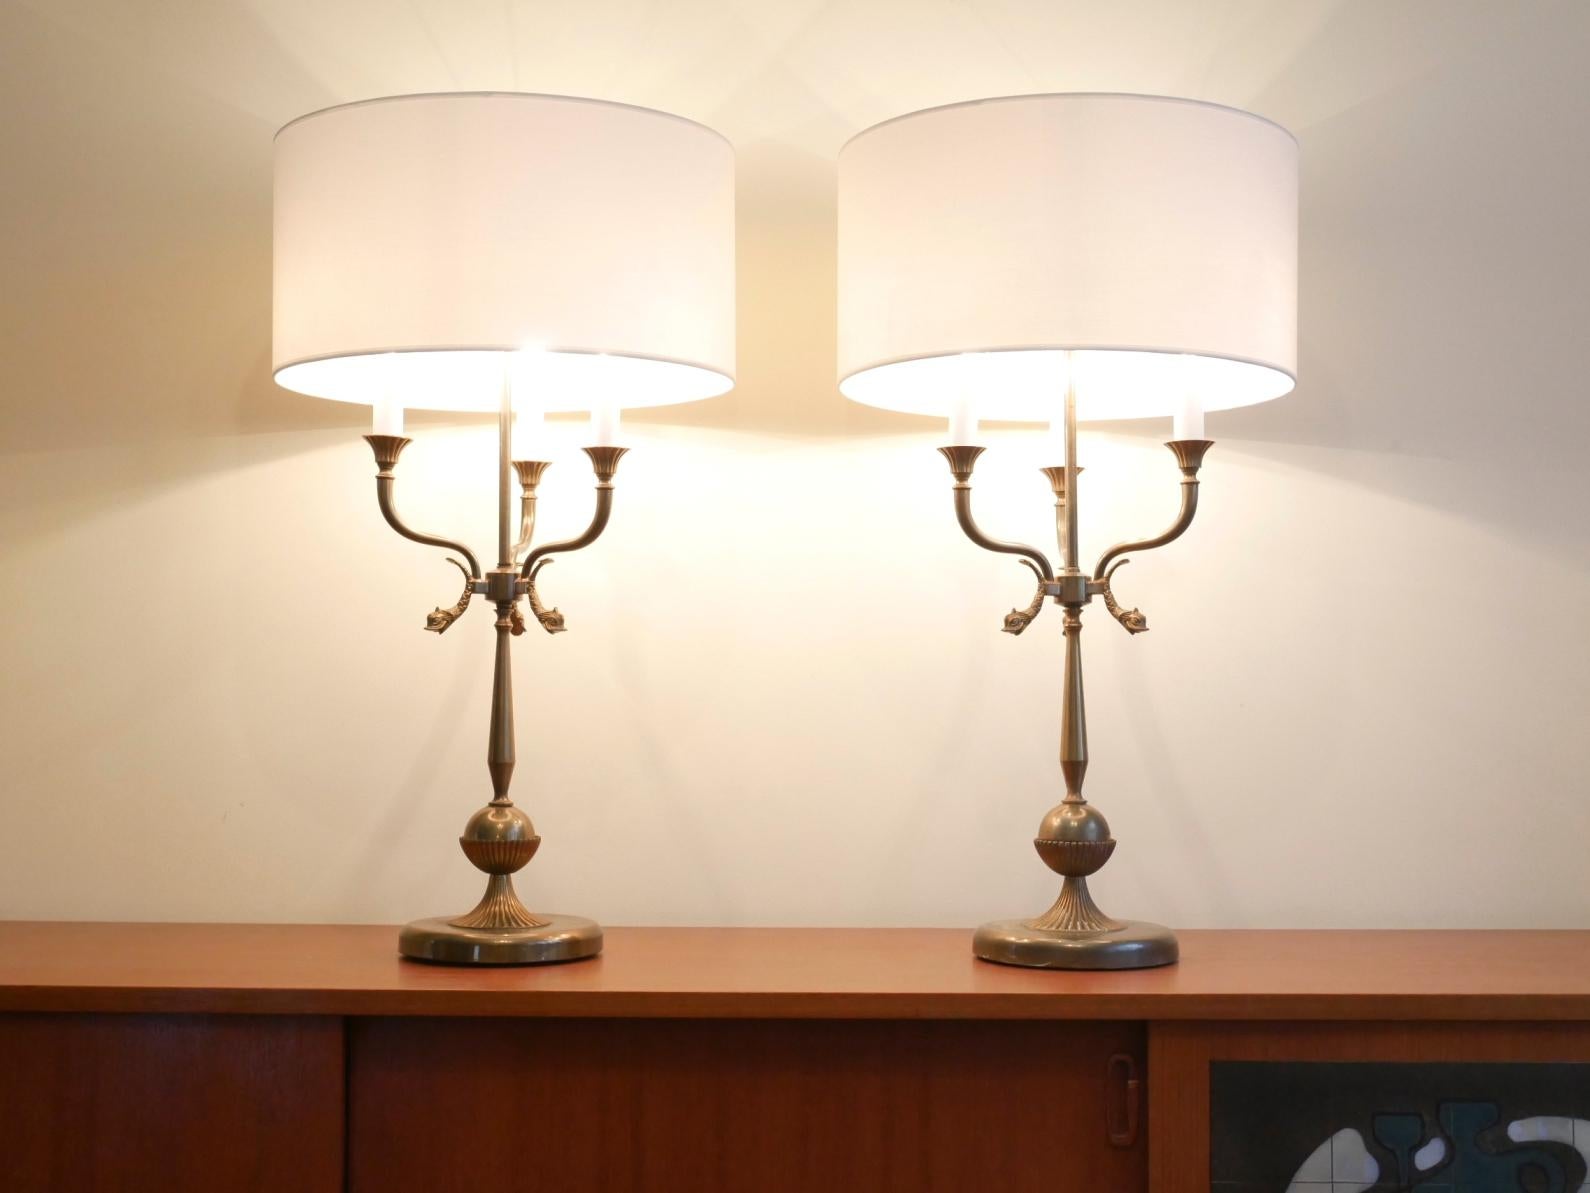 Set of 2x French candelabra table lamps dating from the 1940s in the manner of Maison Charles, full brass structures in a Neoclassic style.